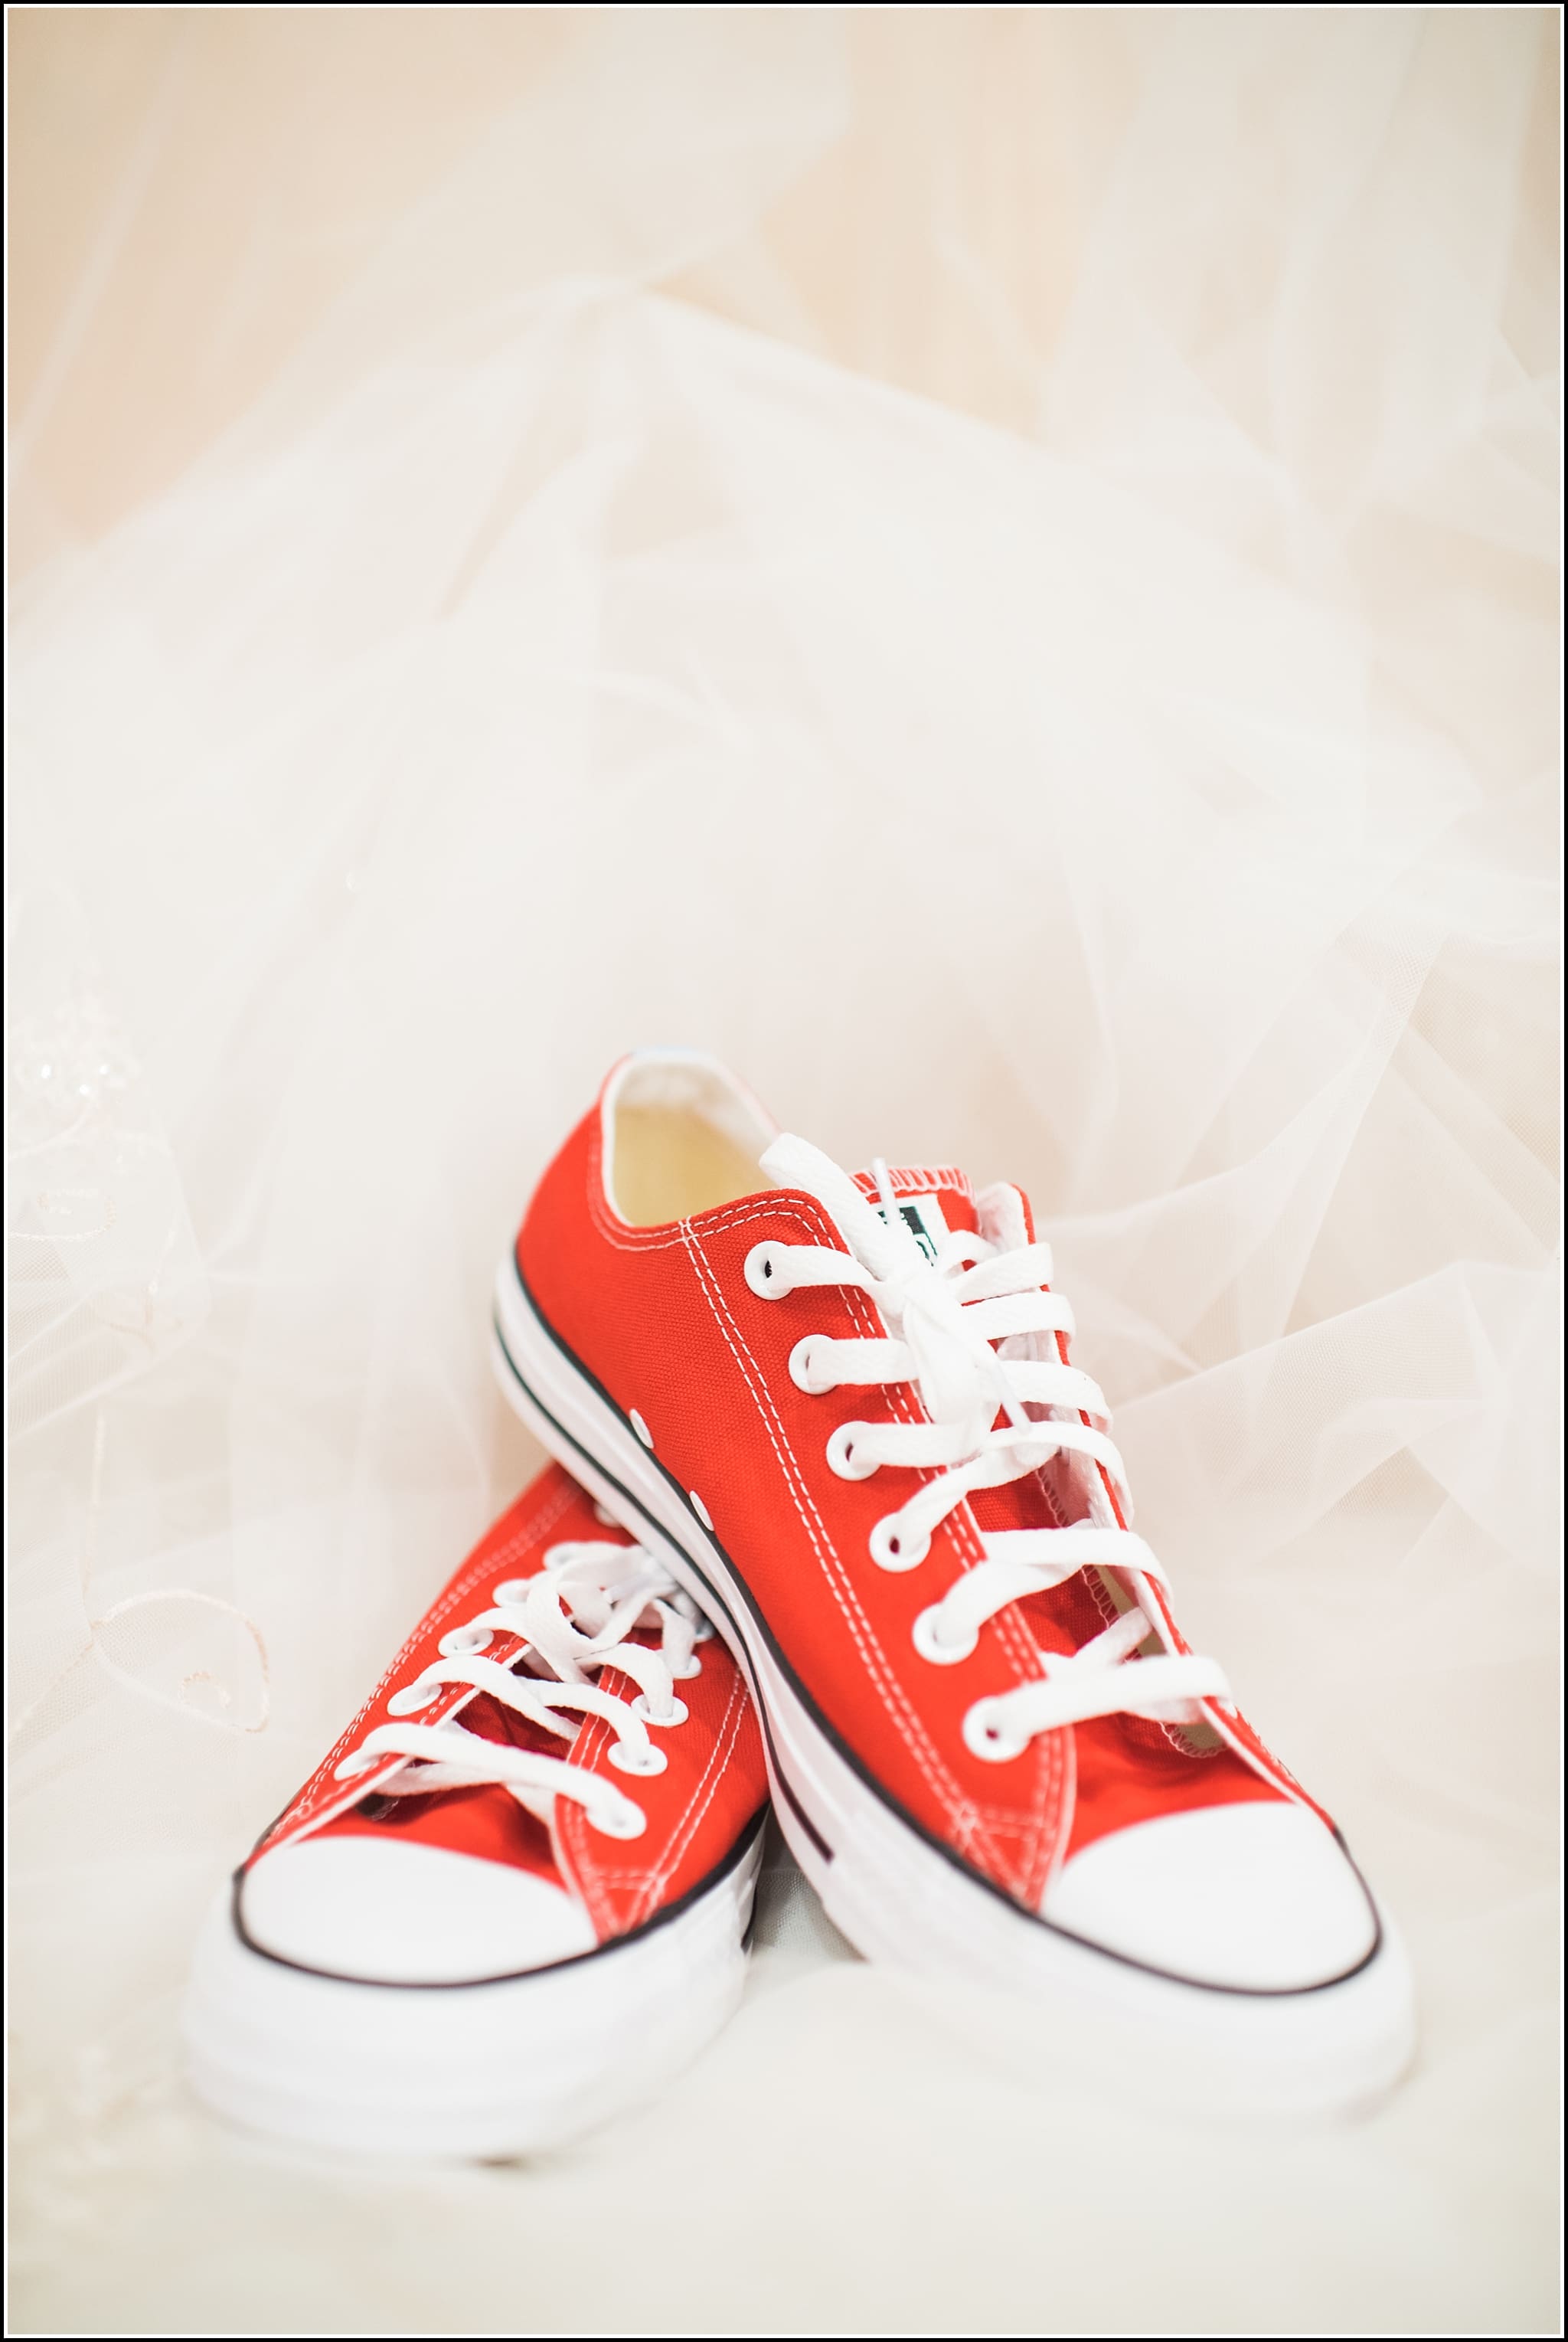  favorite wedding images 2016, wedding photos from 2016, our favorite wedding photos, red bridal converse, converse all stars for brides